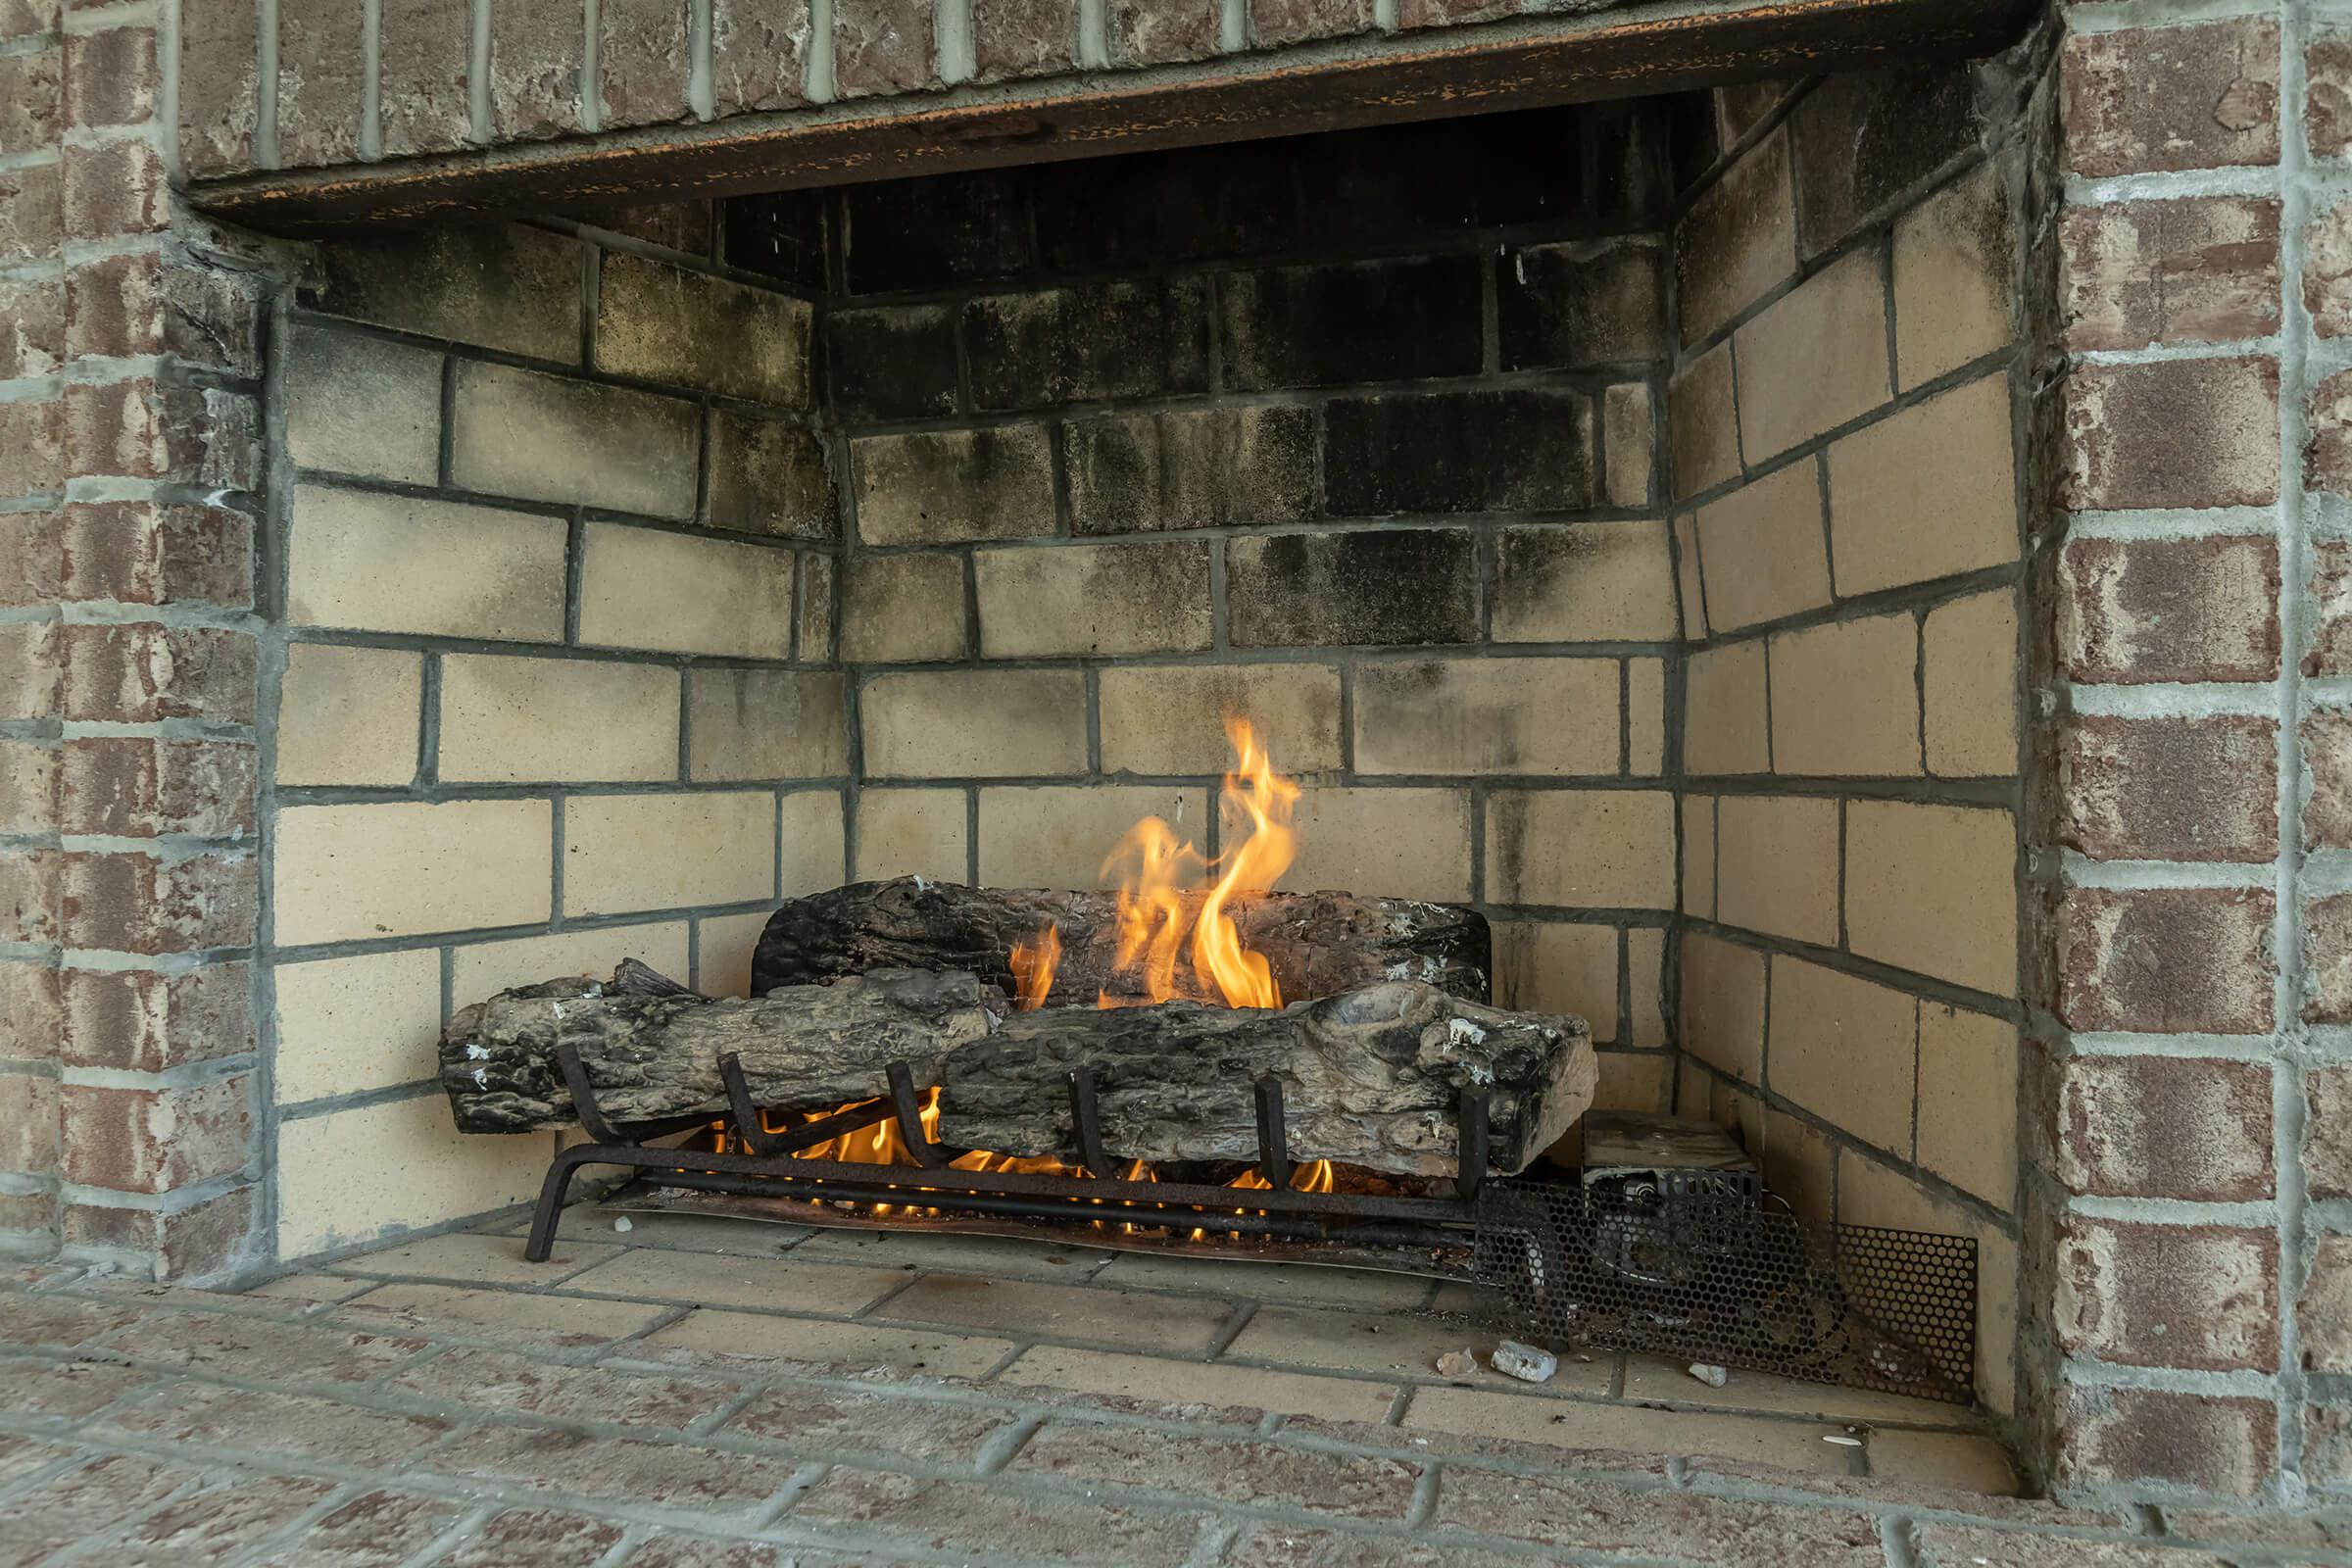 a stone fireplace in front of a brick building